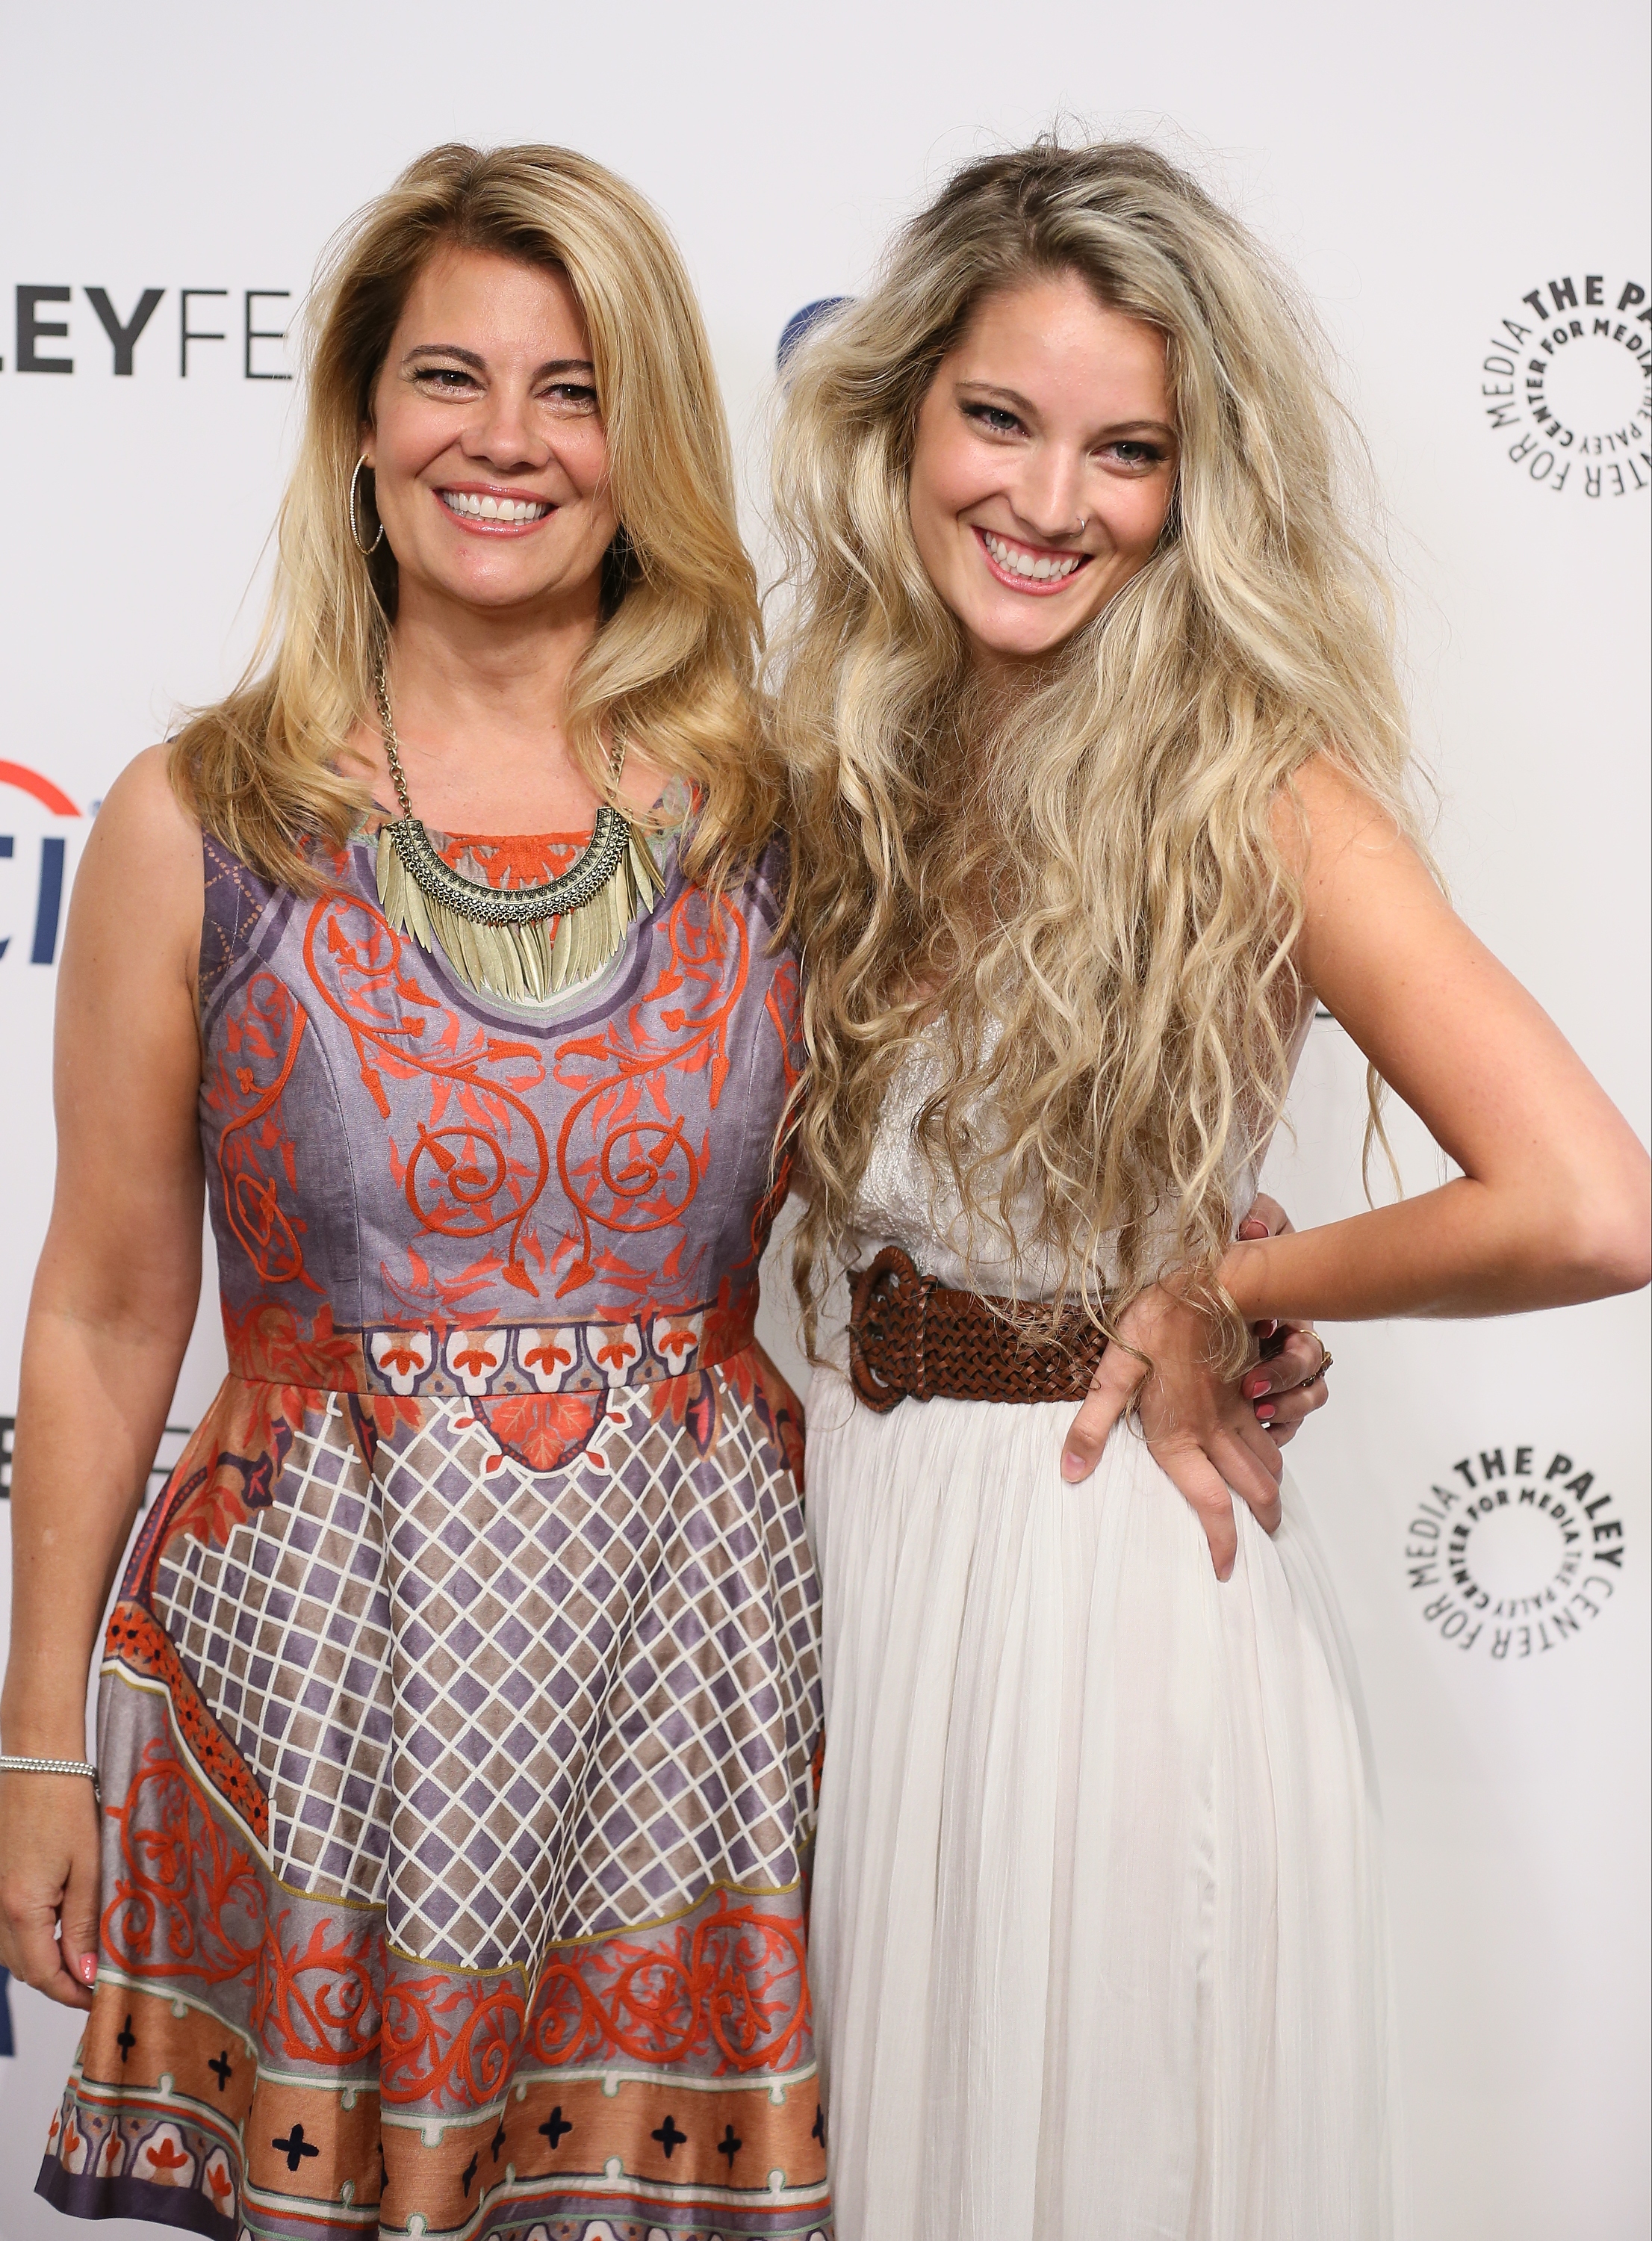 Lisa Whelchel and Clancy Cauble attends the 2014 PaleyFest Fall TV preview of "The Facts Of Life" 35th anniversary reunion on September 15, 2014 in Beverly Hills, California. | Source: Getty Images